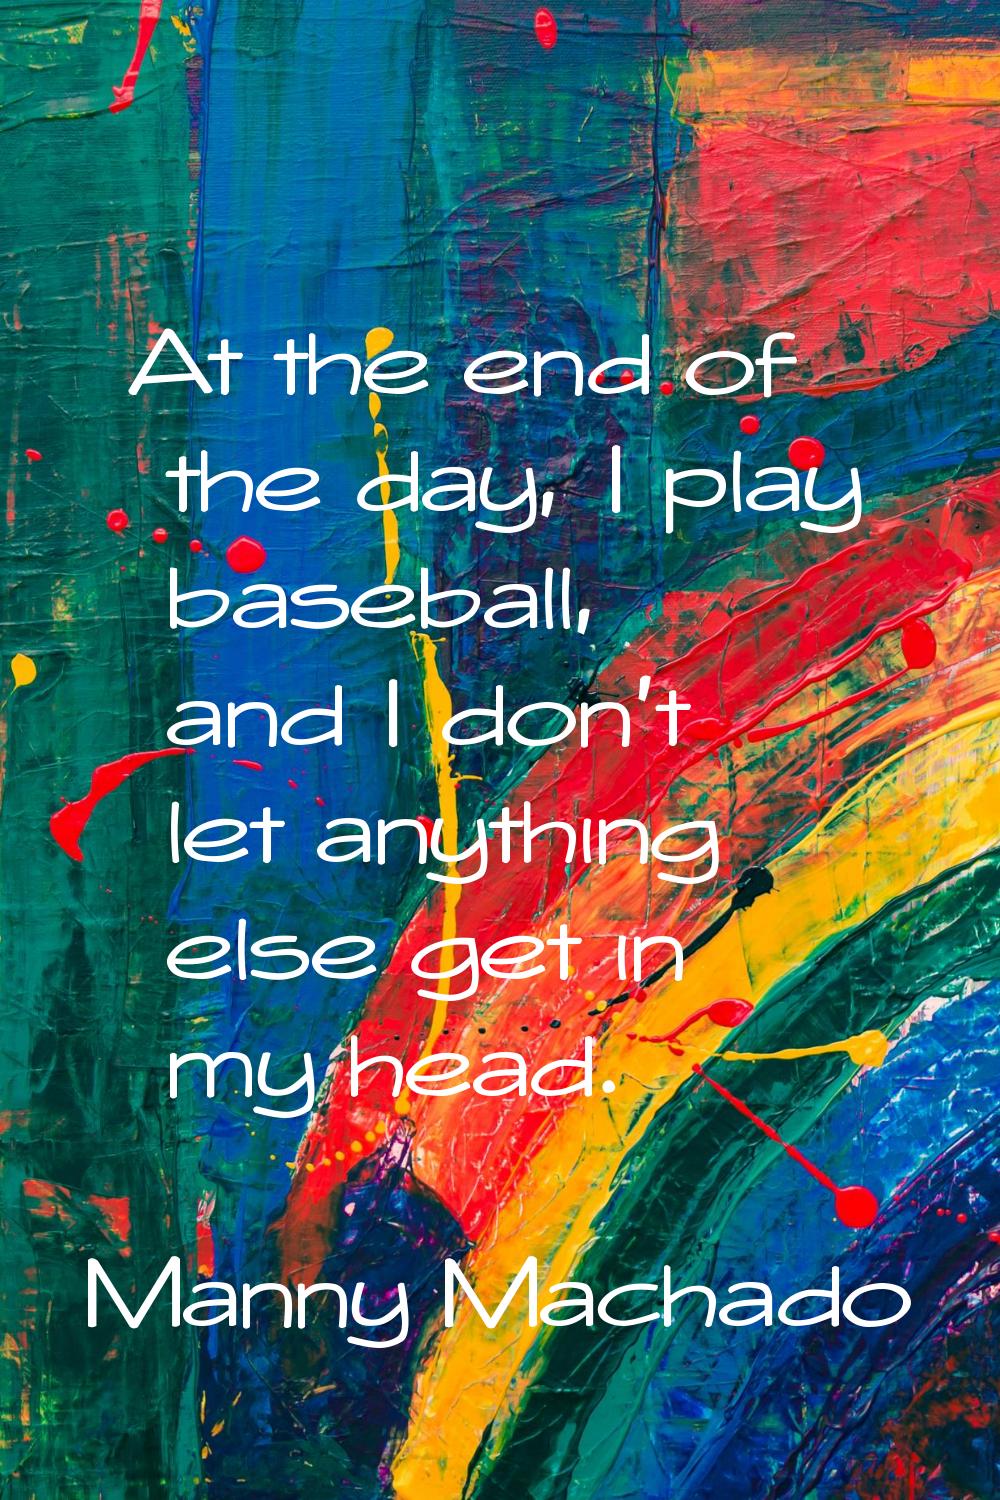 At the end of the day, I play baseball, and I don't let anything else get in my head.